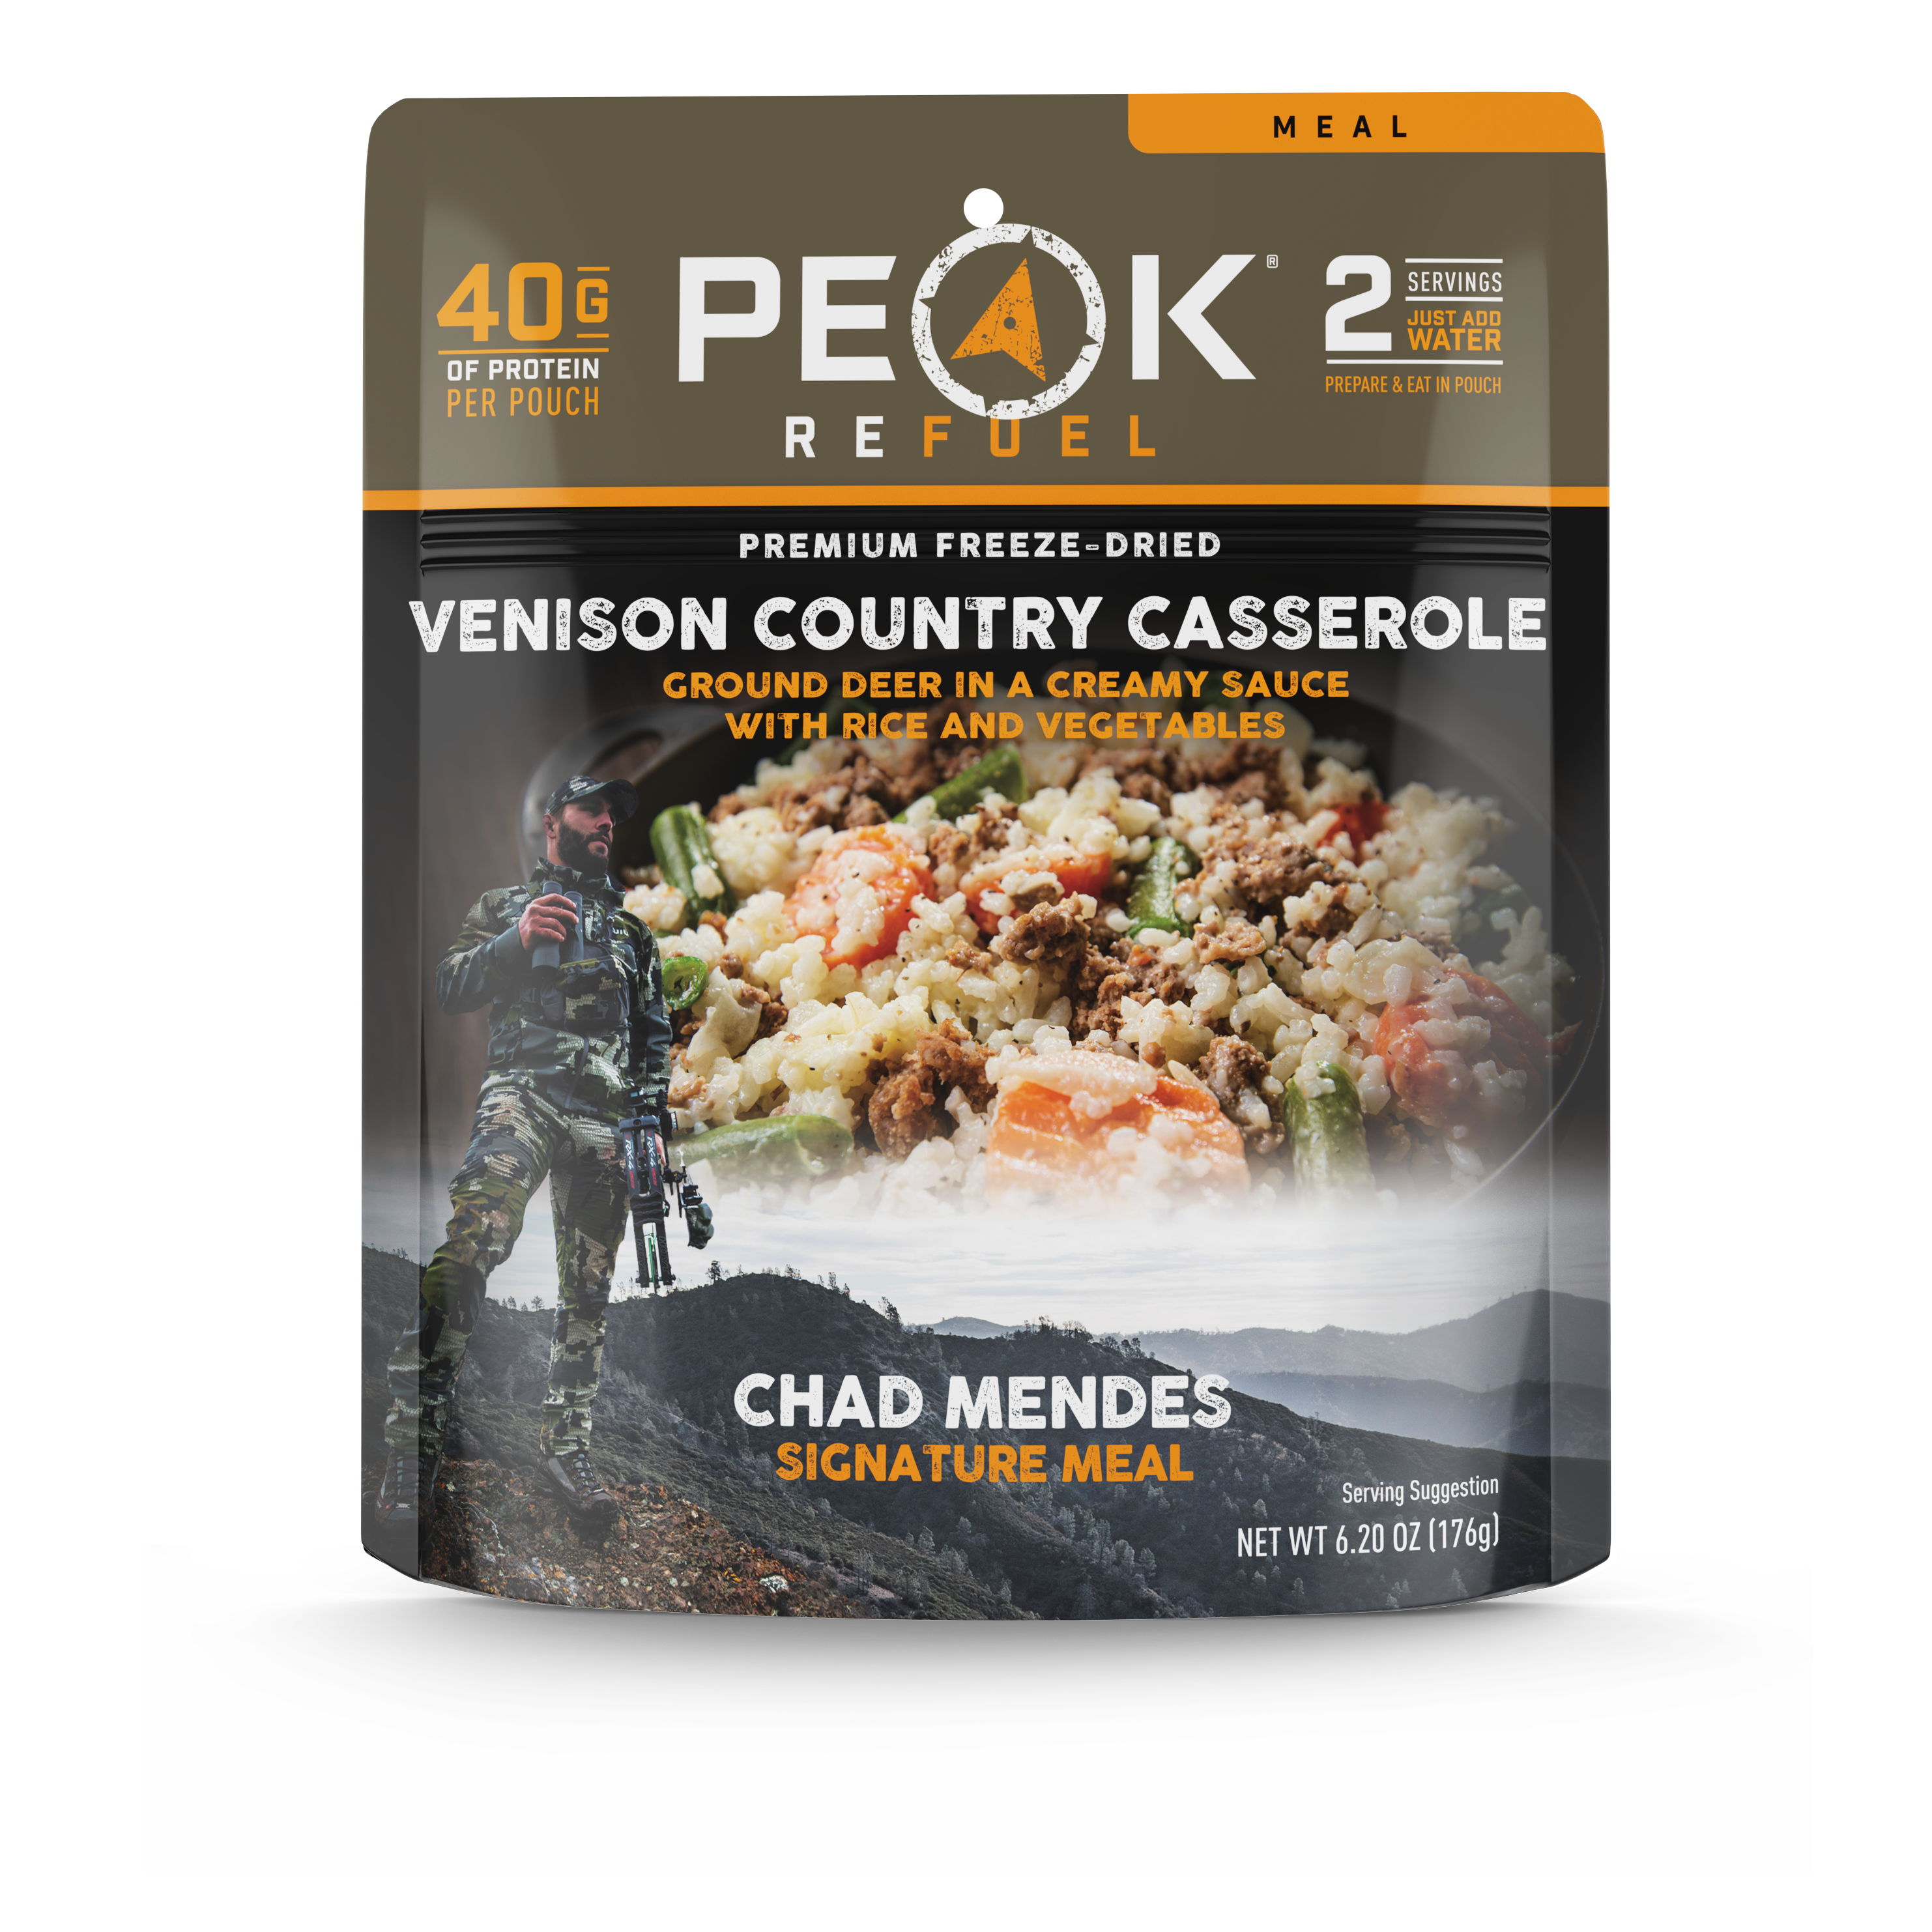 A package of food featuring a man on the label, held by a person in camouflage with a gun.